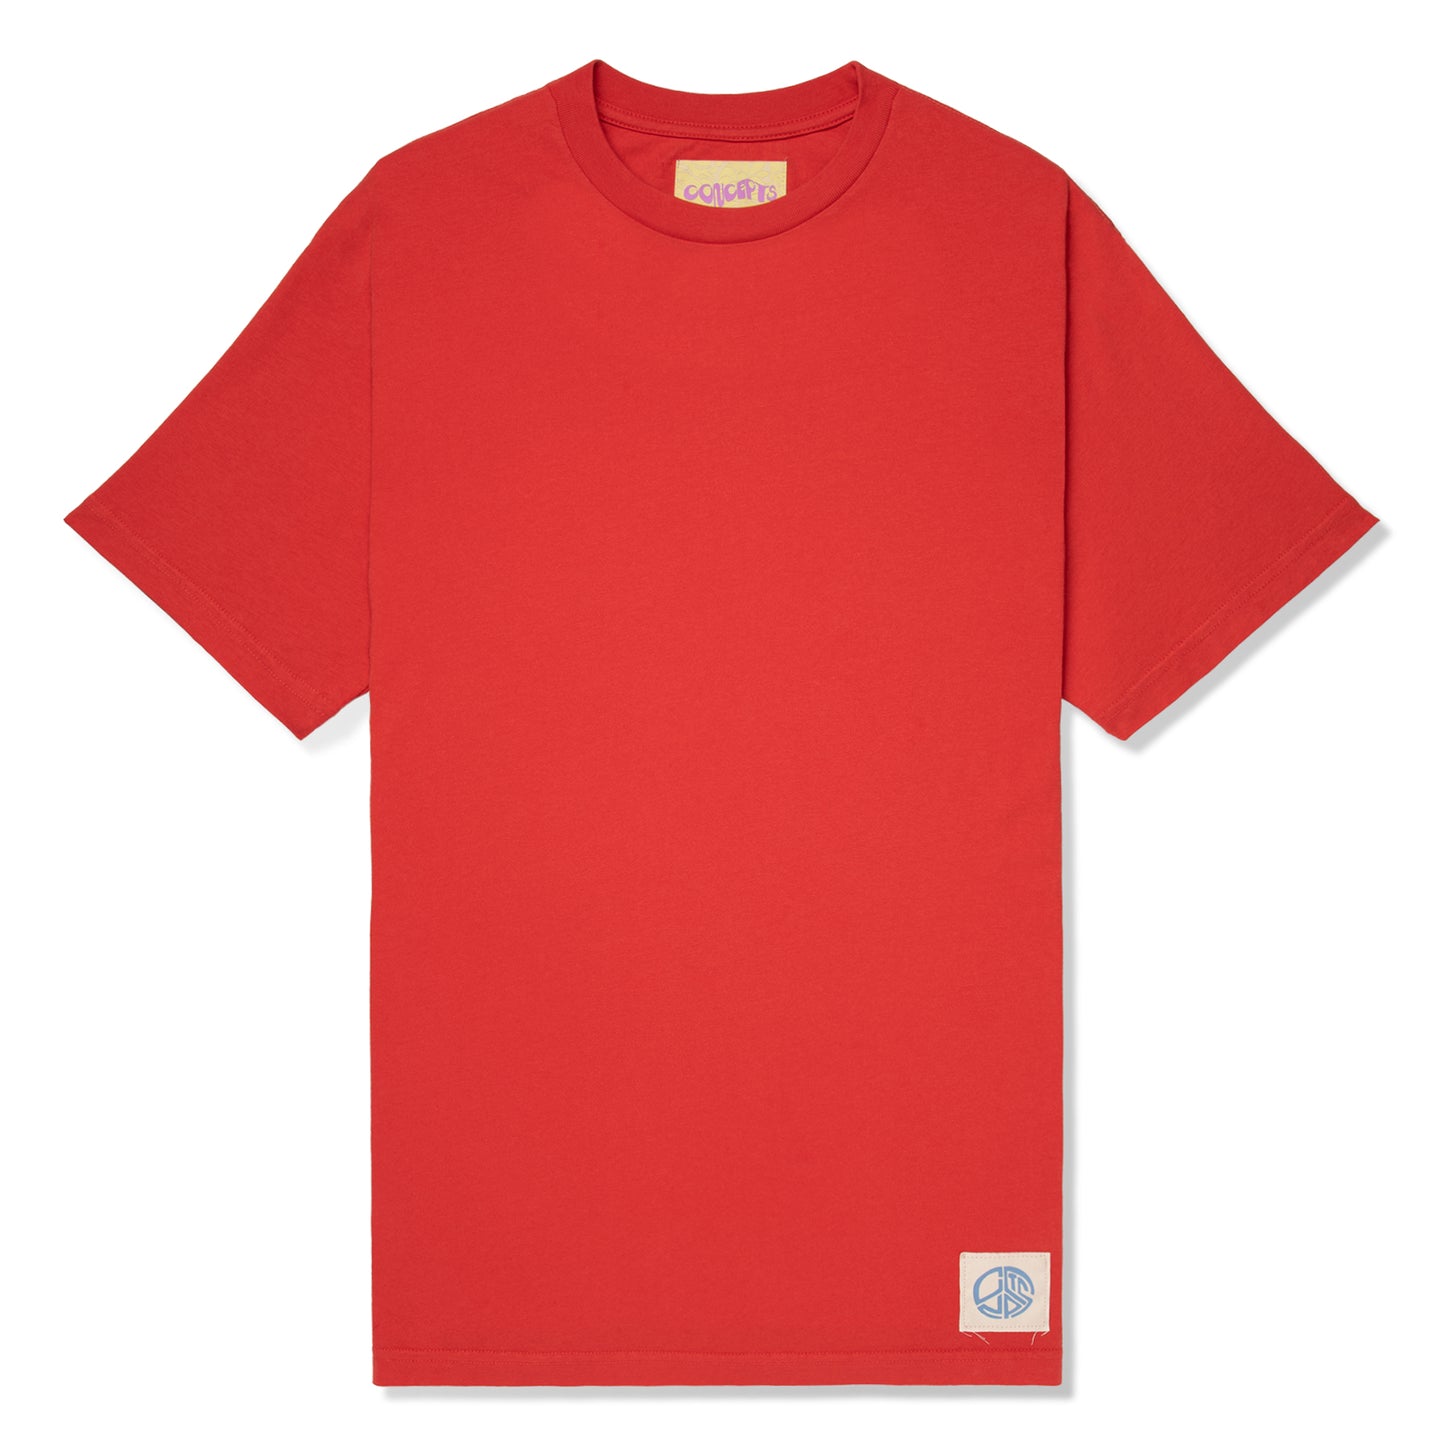 Concepts Patch Tee (Scarlet)